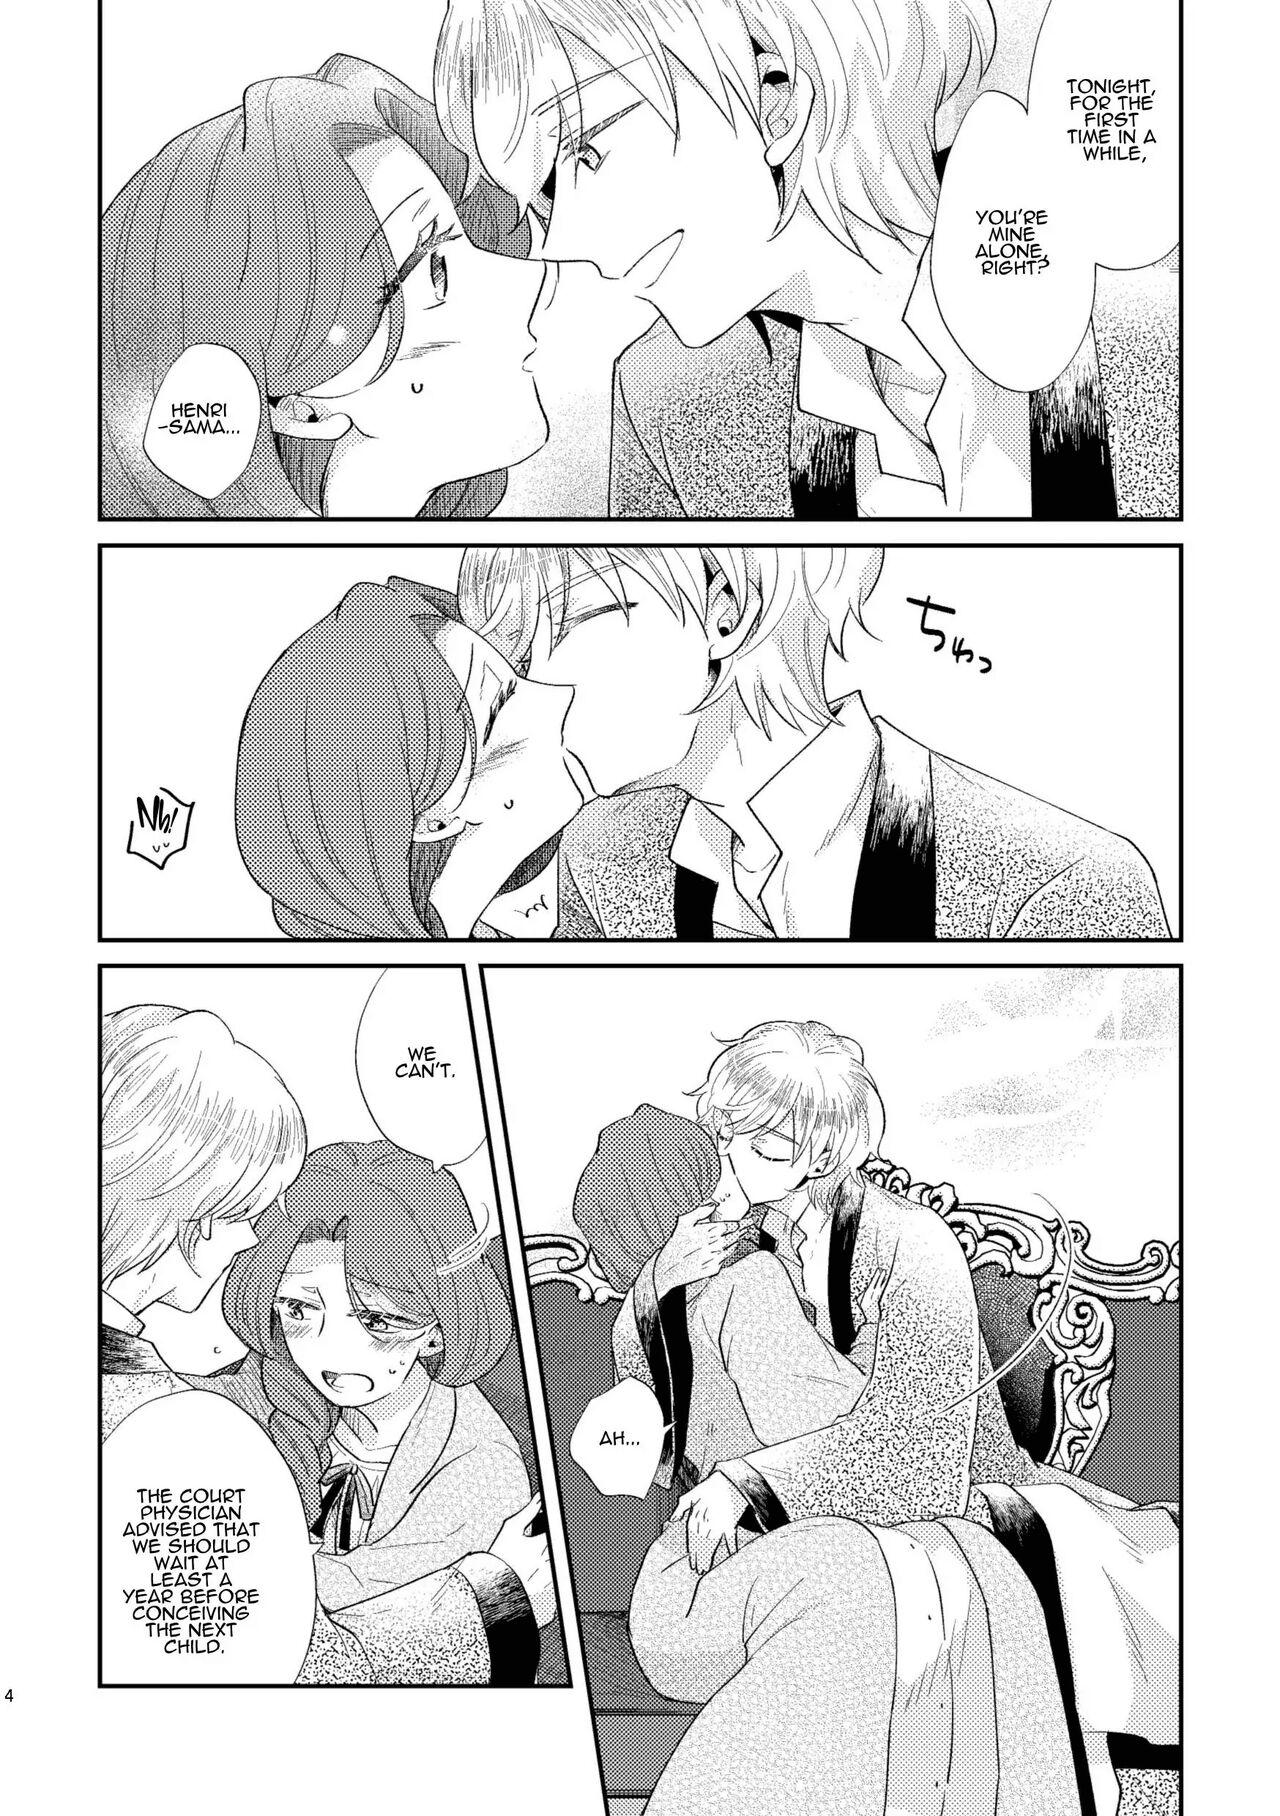 Leche Shounen Ou to Toshiue Ouhi EverAfter | The Boy King and His Older Queen EverAfter Wives - Page 6